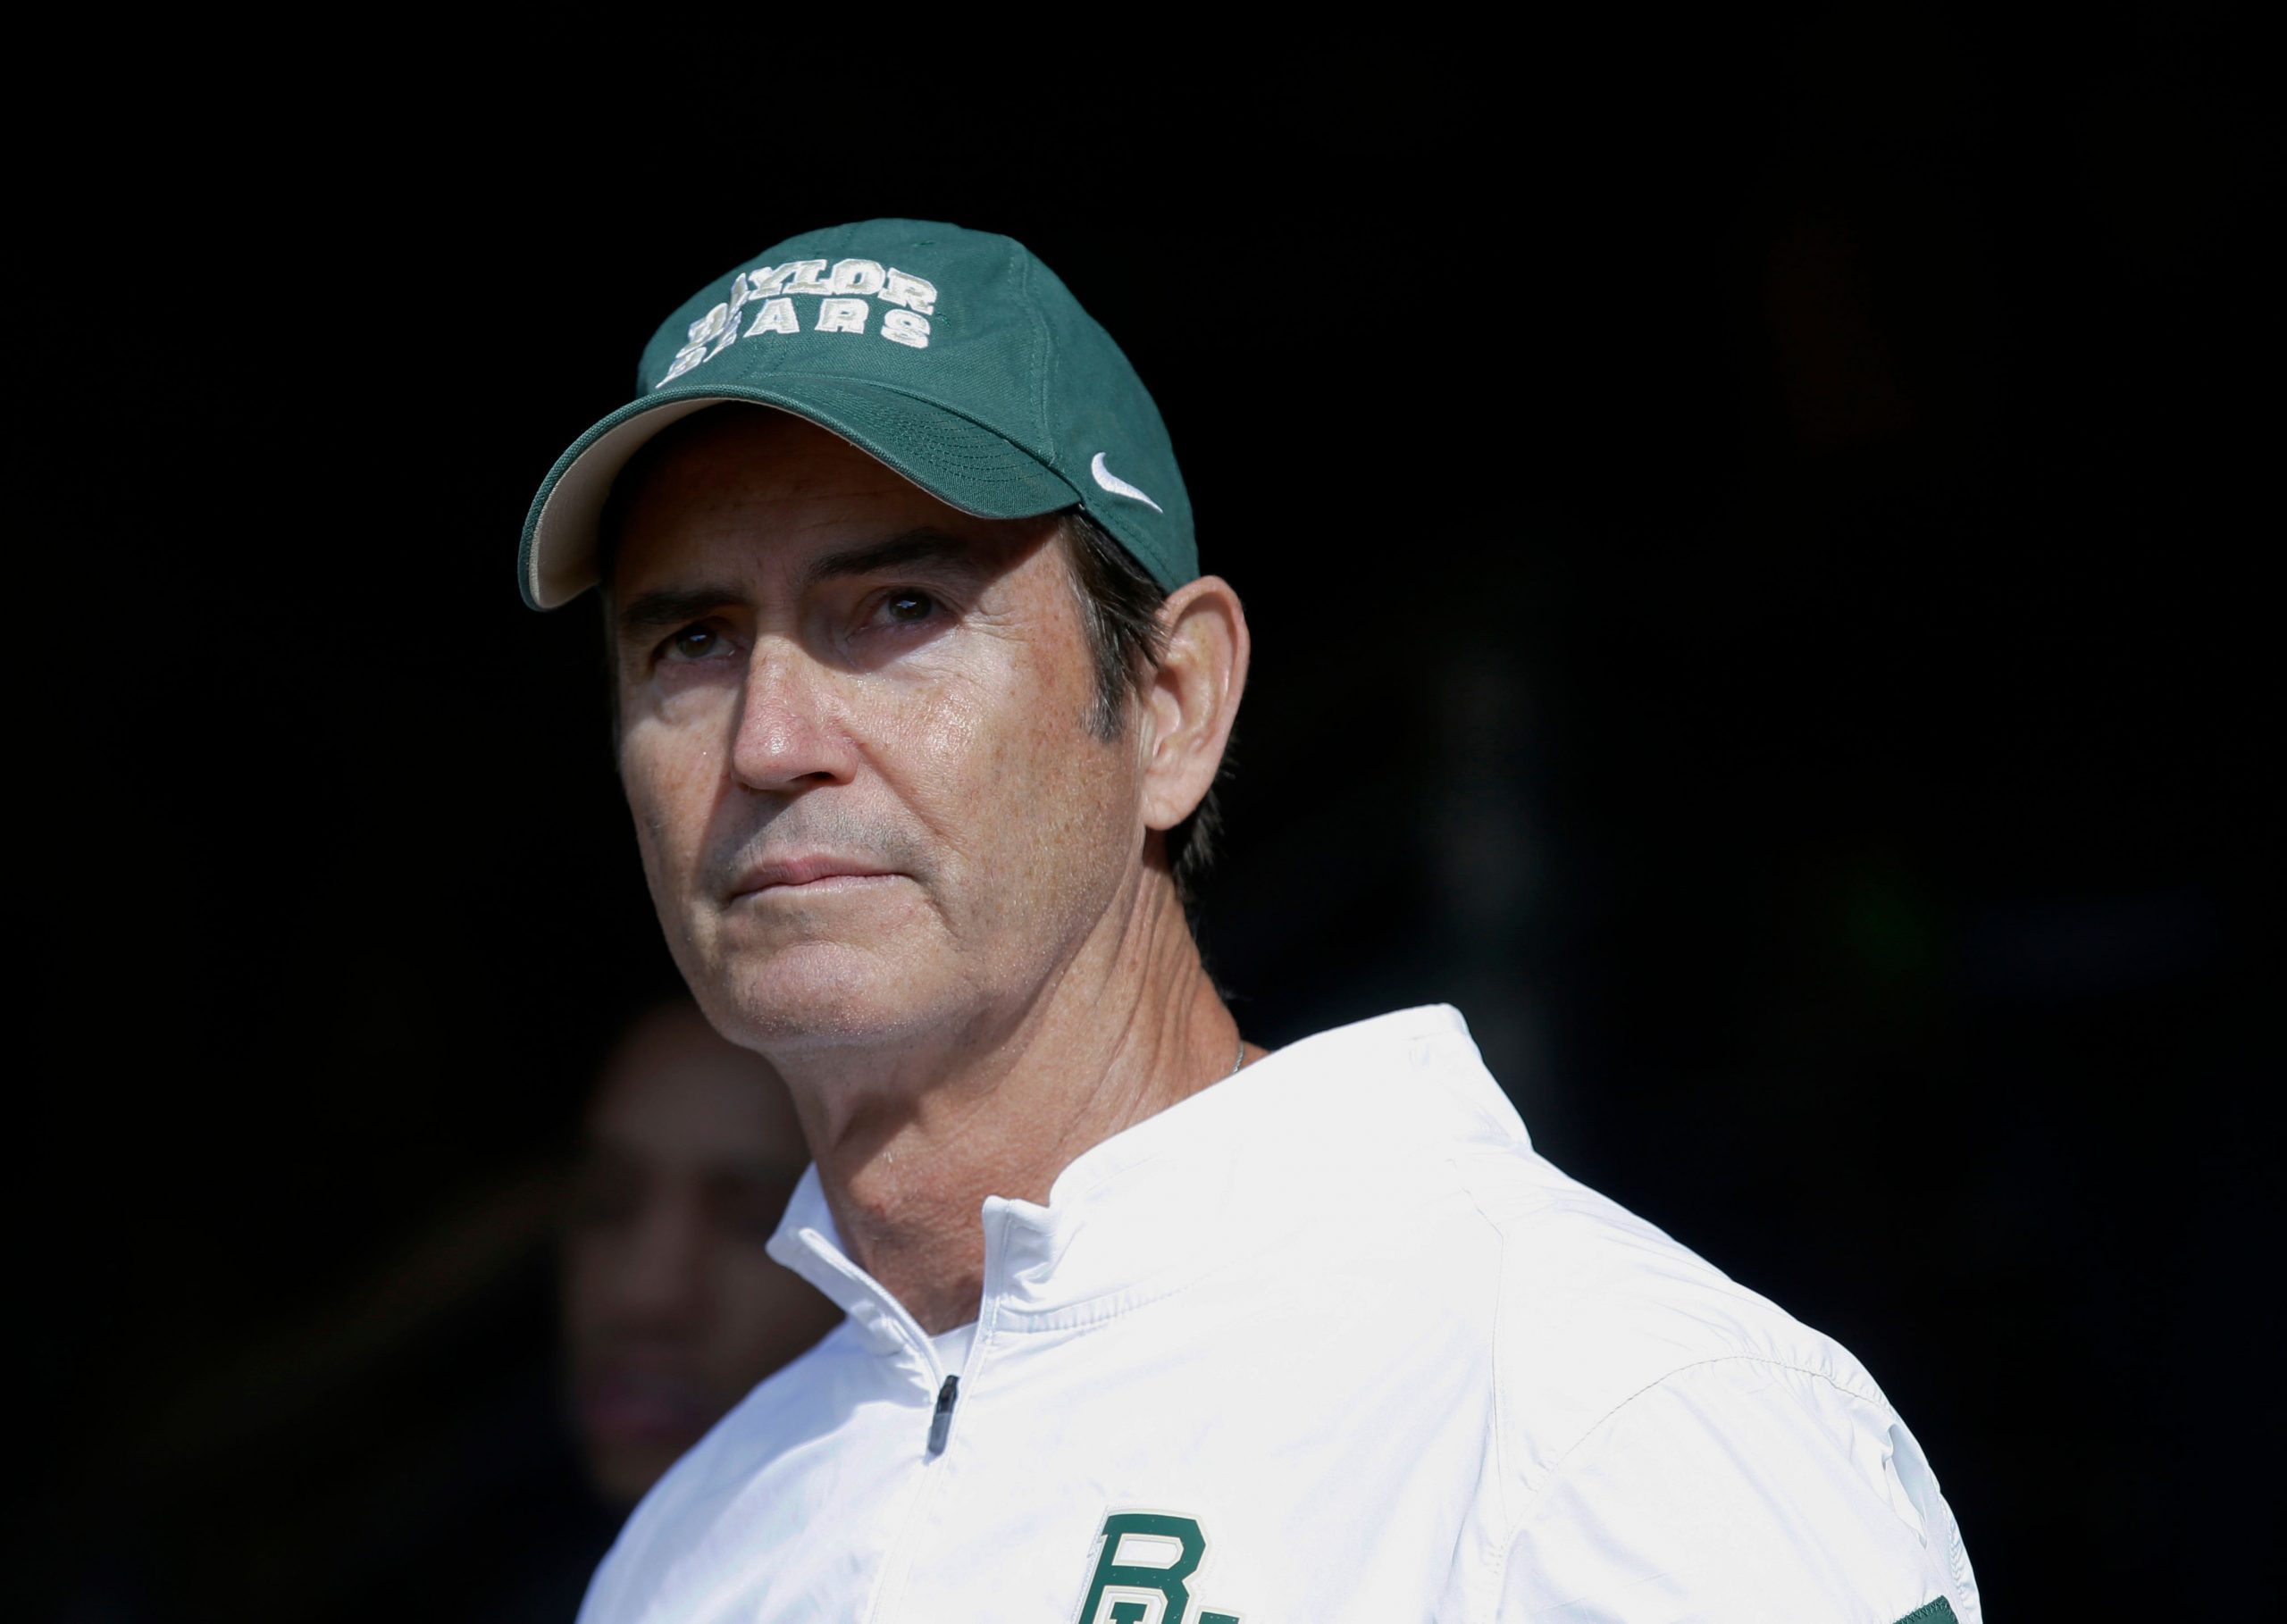 Baylor University did not violate rules: NCAA on sexual assault scandal